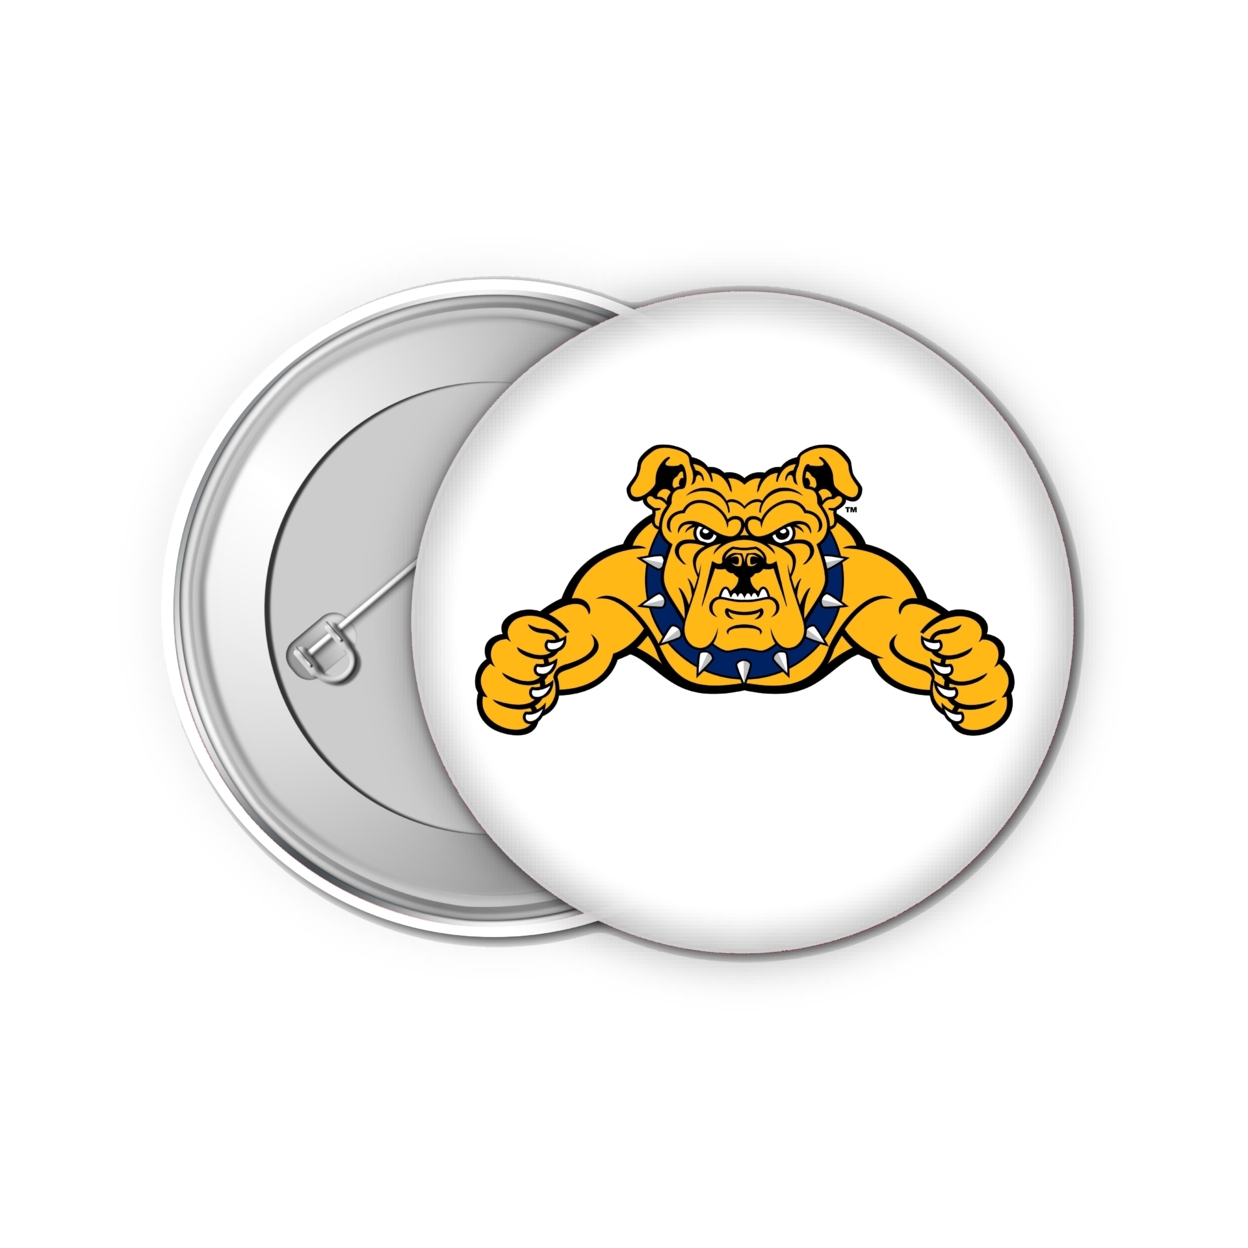 North Carolina A&T State Aggies Small 1-Inch Button Pin 4 Pack